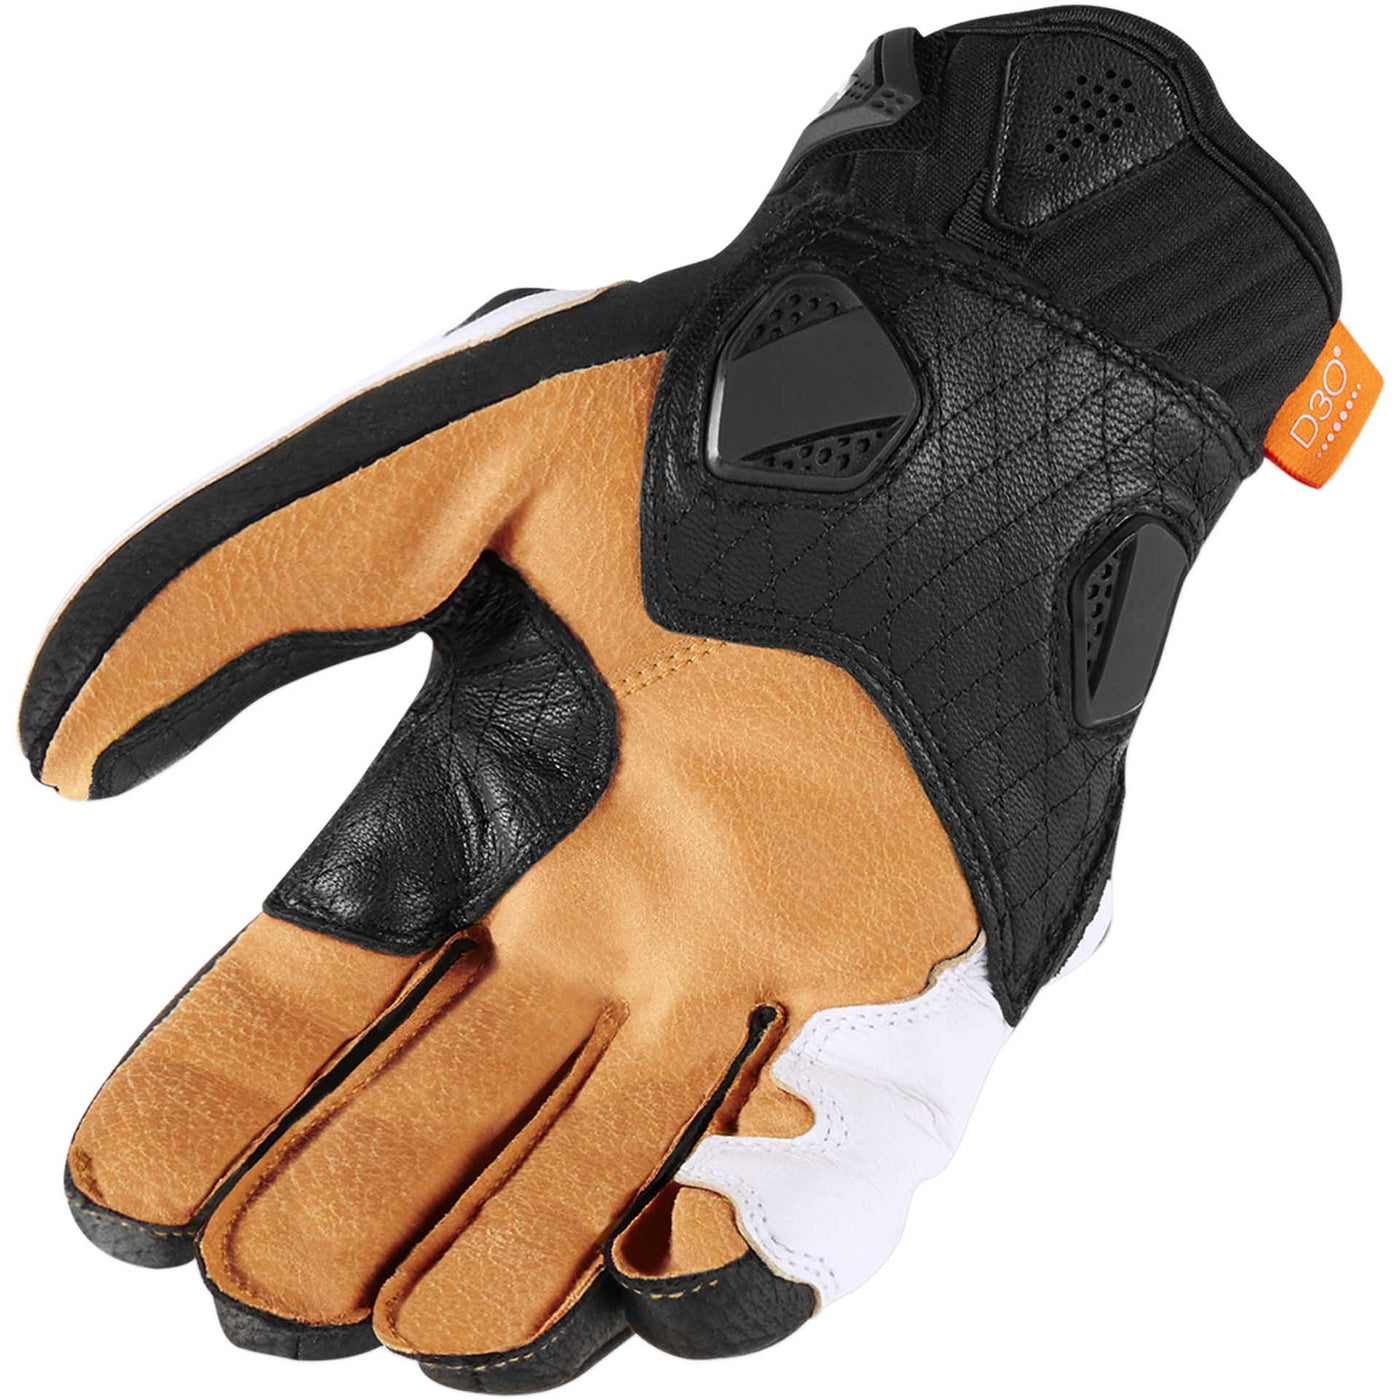 ICON Motorcycle Hypersport Short Gloves